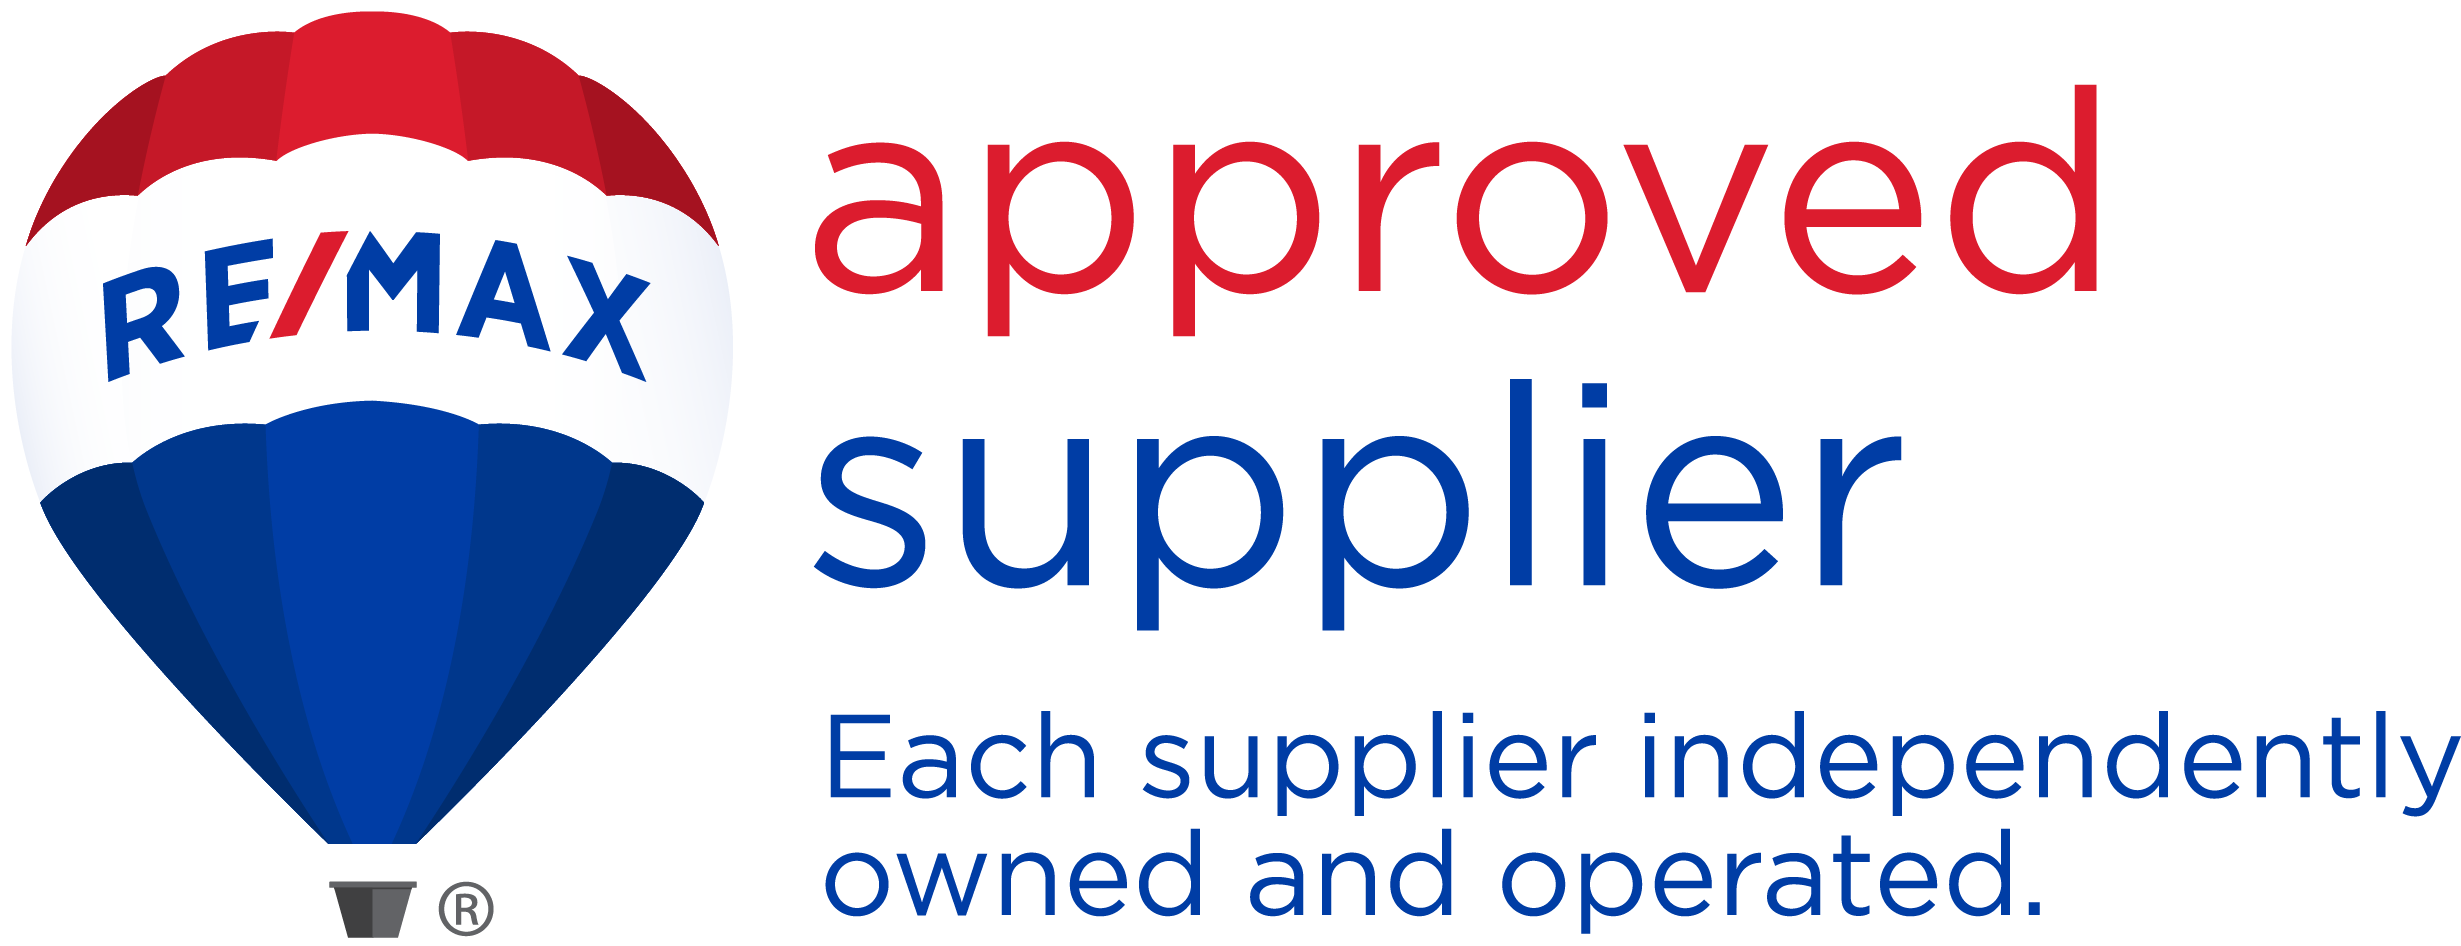 REMAX Approved Supplier